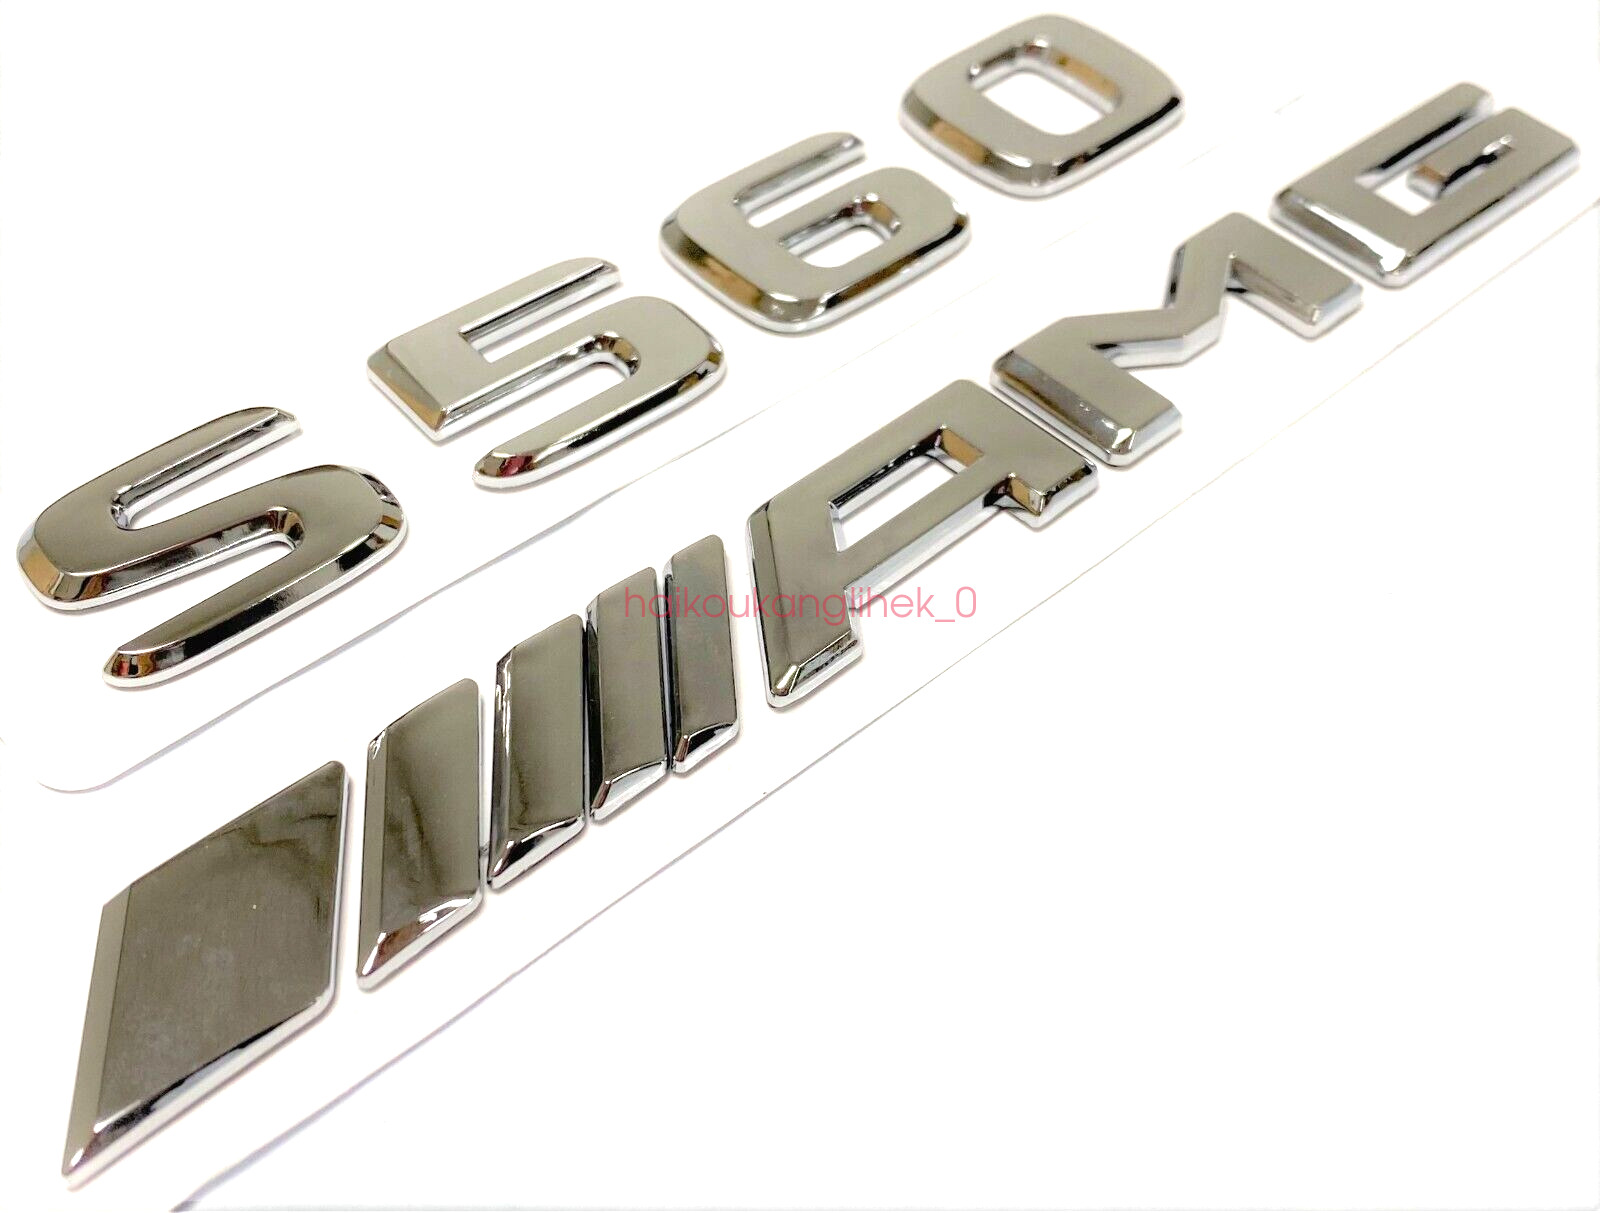 #2 S560+AMG CHROME FIT MERCEDES REAR TRUNK EMBLEM BADGE NAMEPLATE DECAL NUMBERS